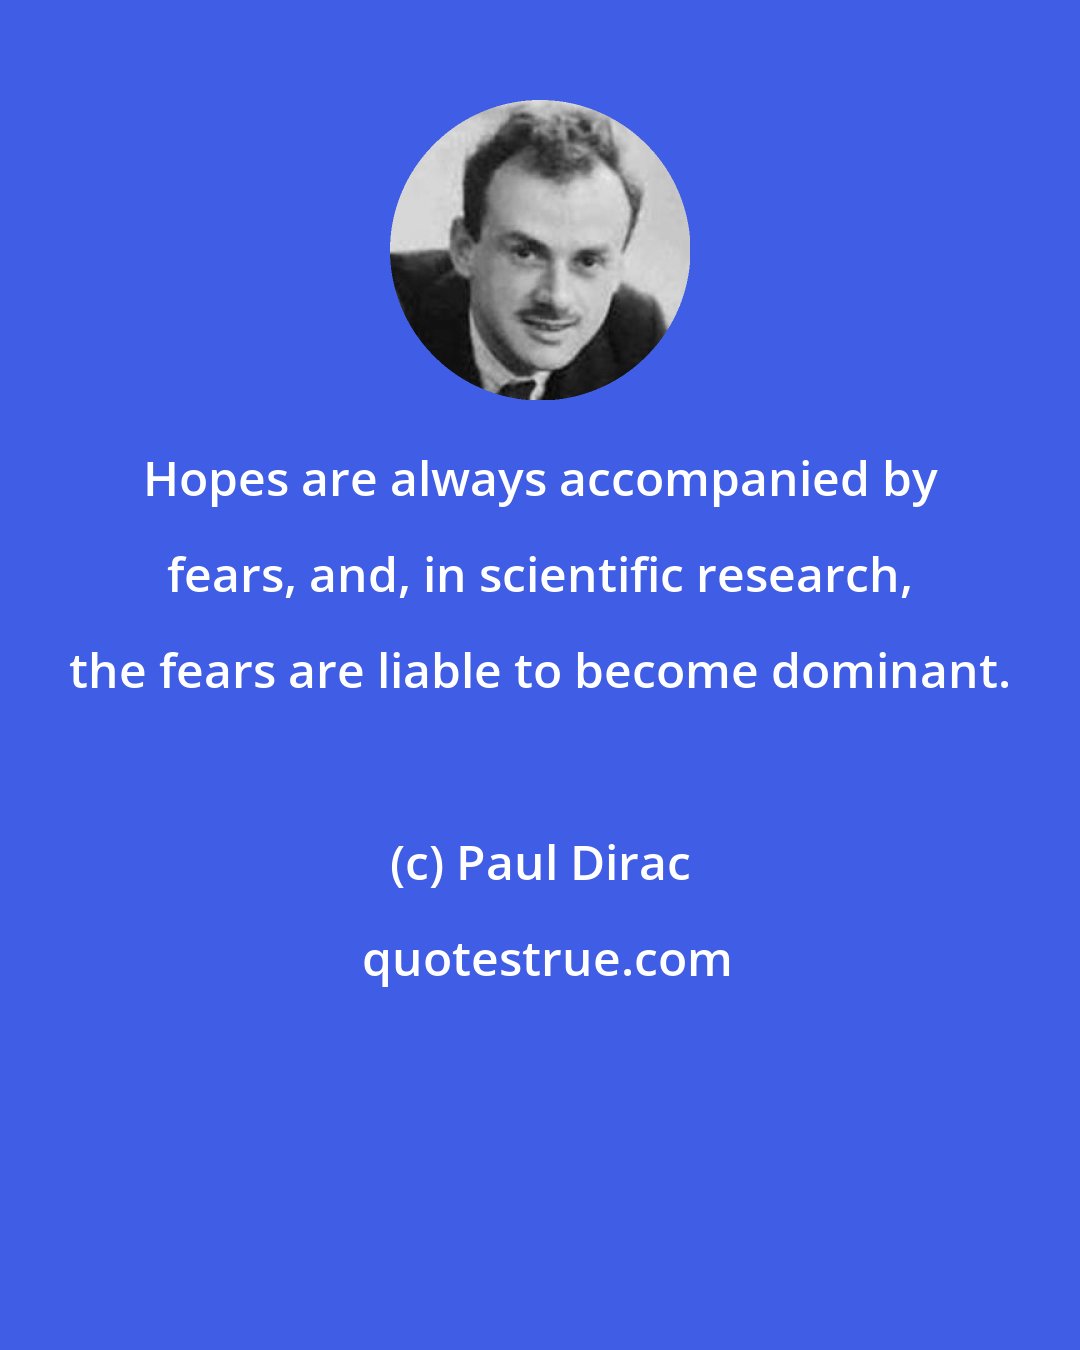 Paul Dirac: Hopes are always accompanied by fears, and, in scientific research, the fears are liable to become dominant.